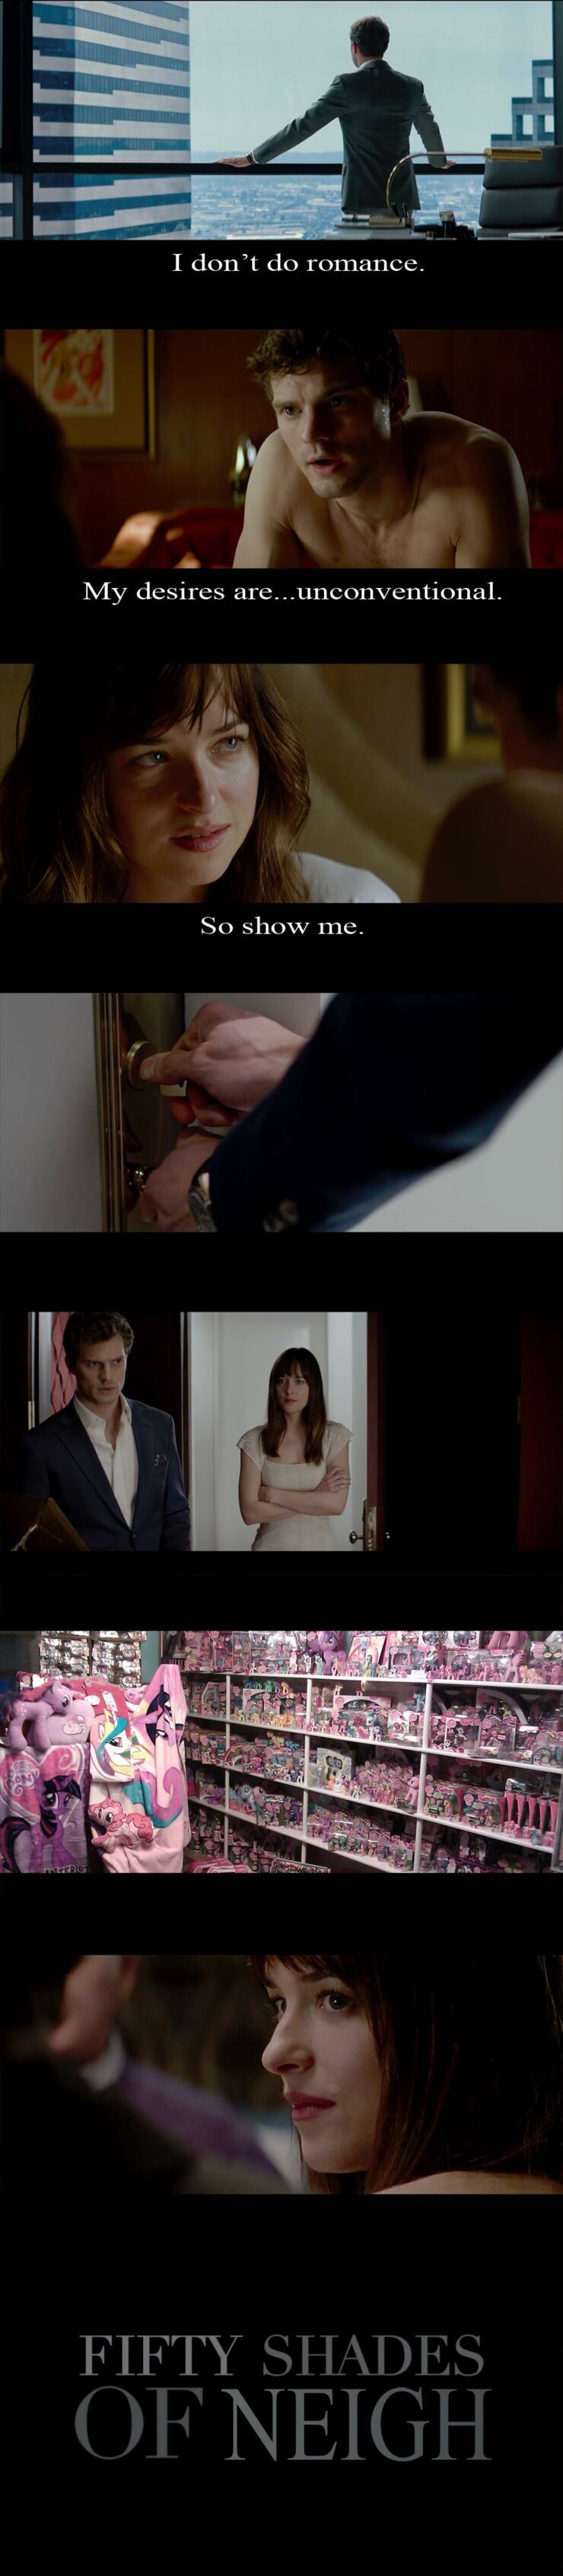 Fifty Shades Of Grey Gets The Meme Treatment